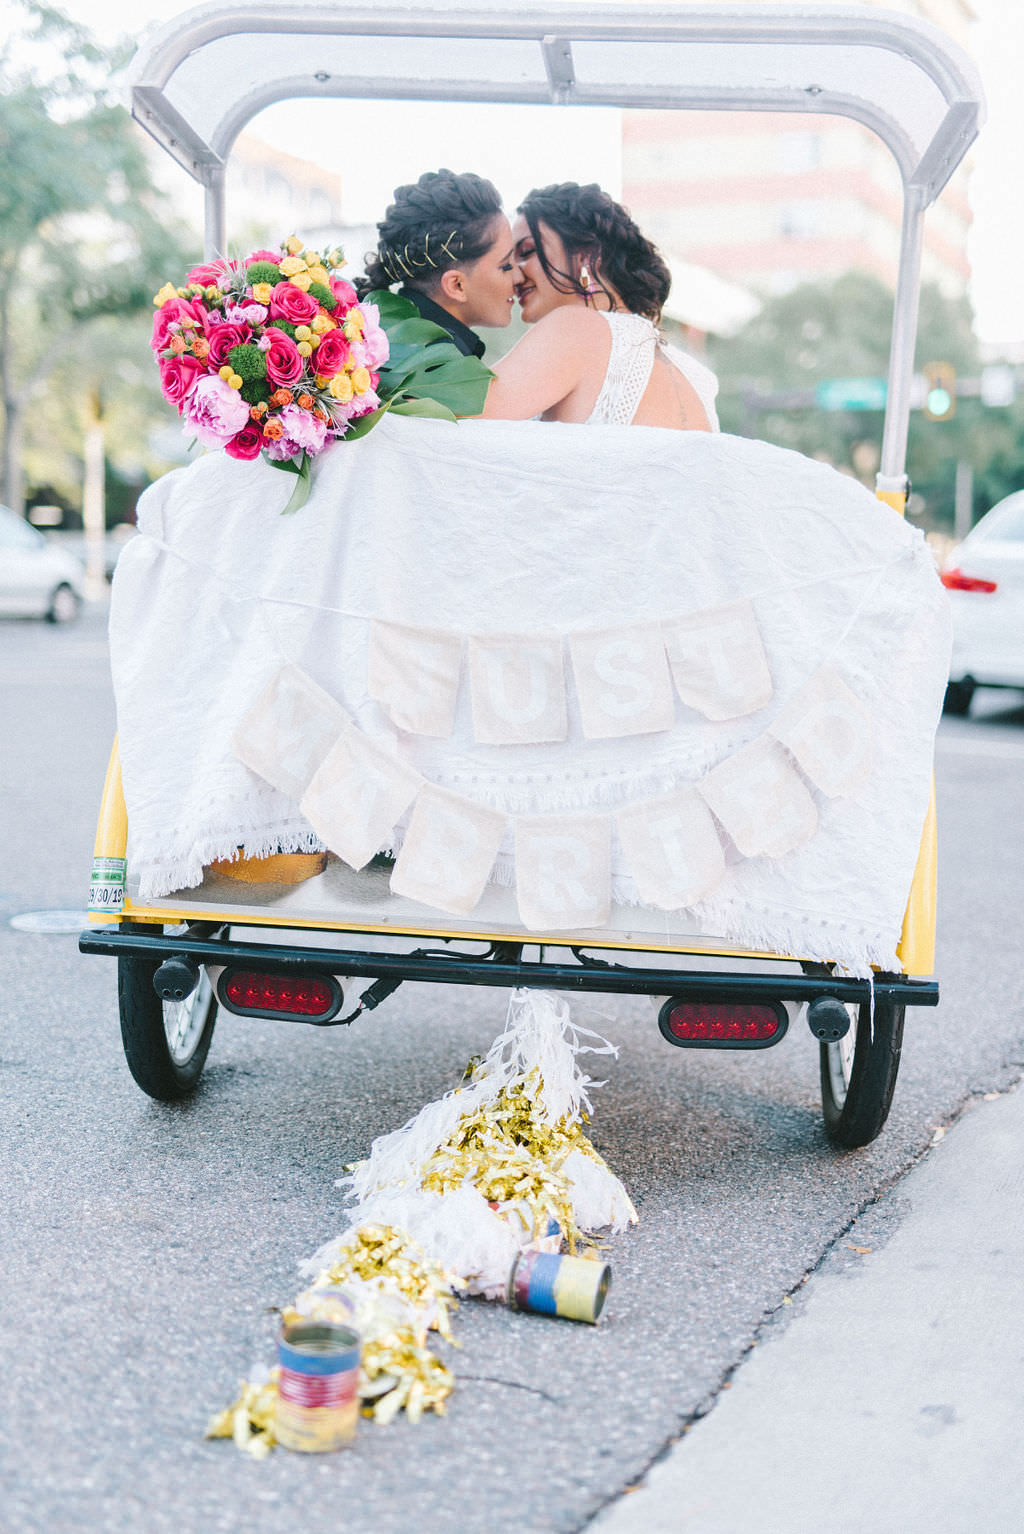 Outdoor Florida Lesbian Gay Wedding Portrait on St. Pete Pedicab with Colorful Pink, Yellow and Purple Flower Bridal Bouquet | Tampa Bay Wedding Photographer Kera Photography